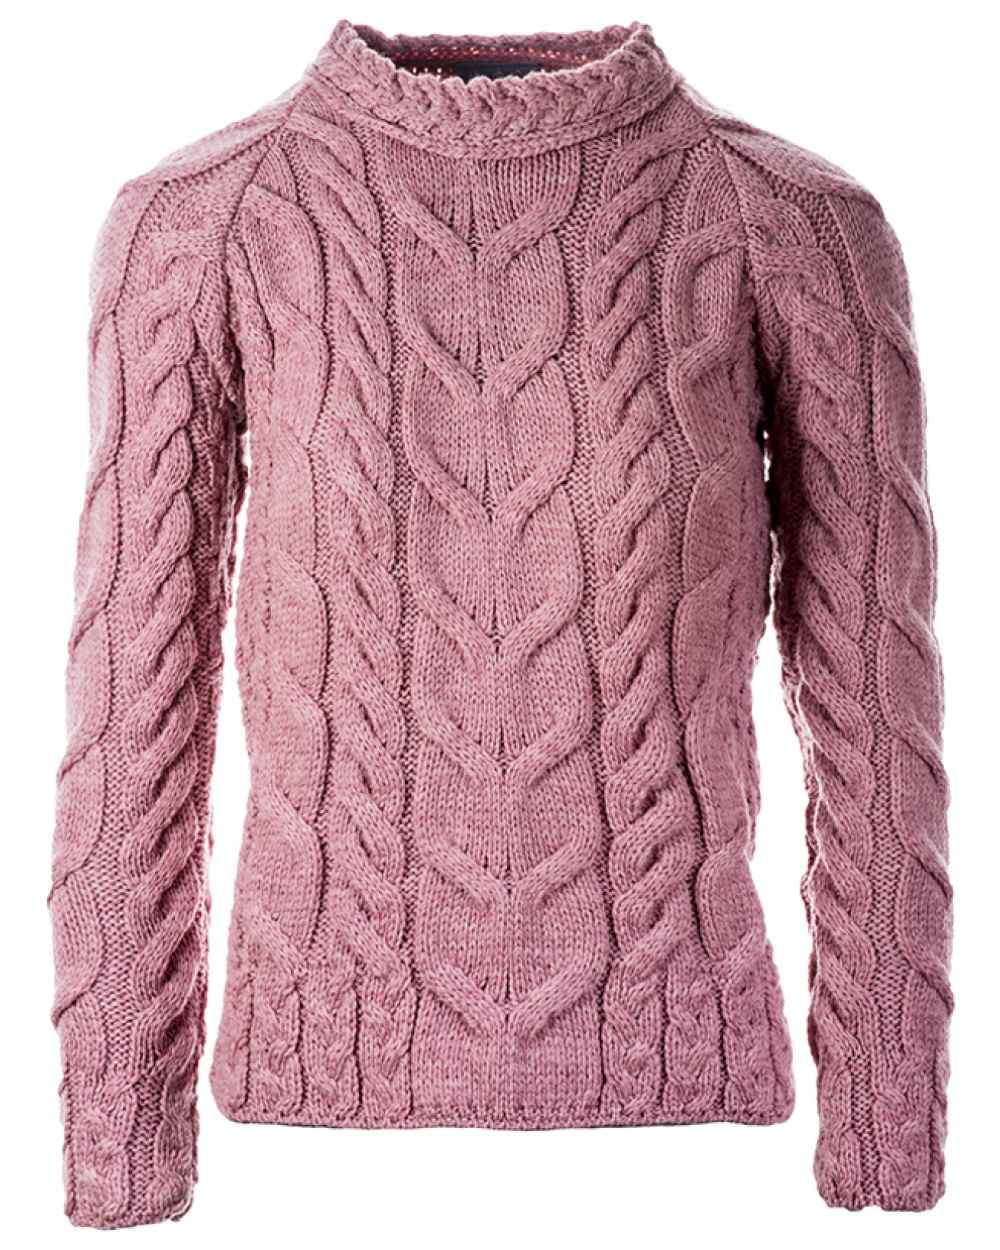 Aran Womens Listowel Cabled Sweater in Pink 